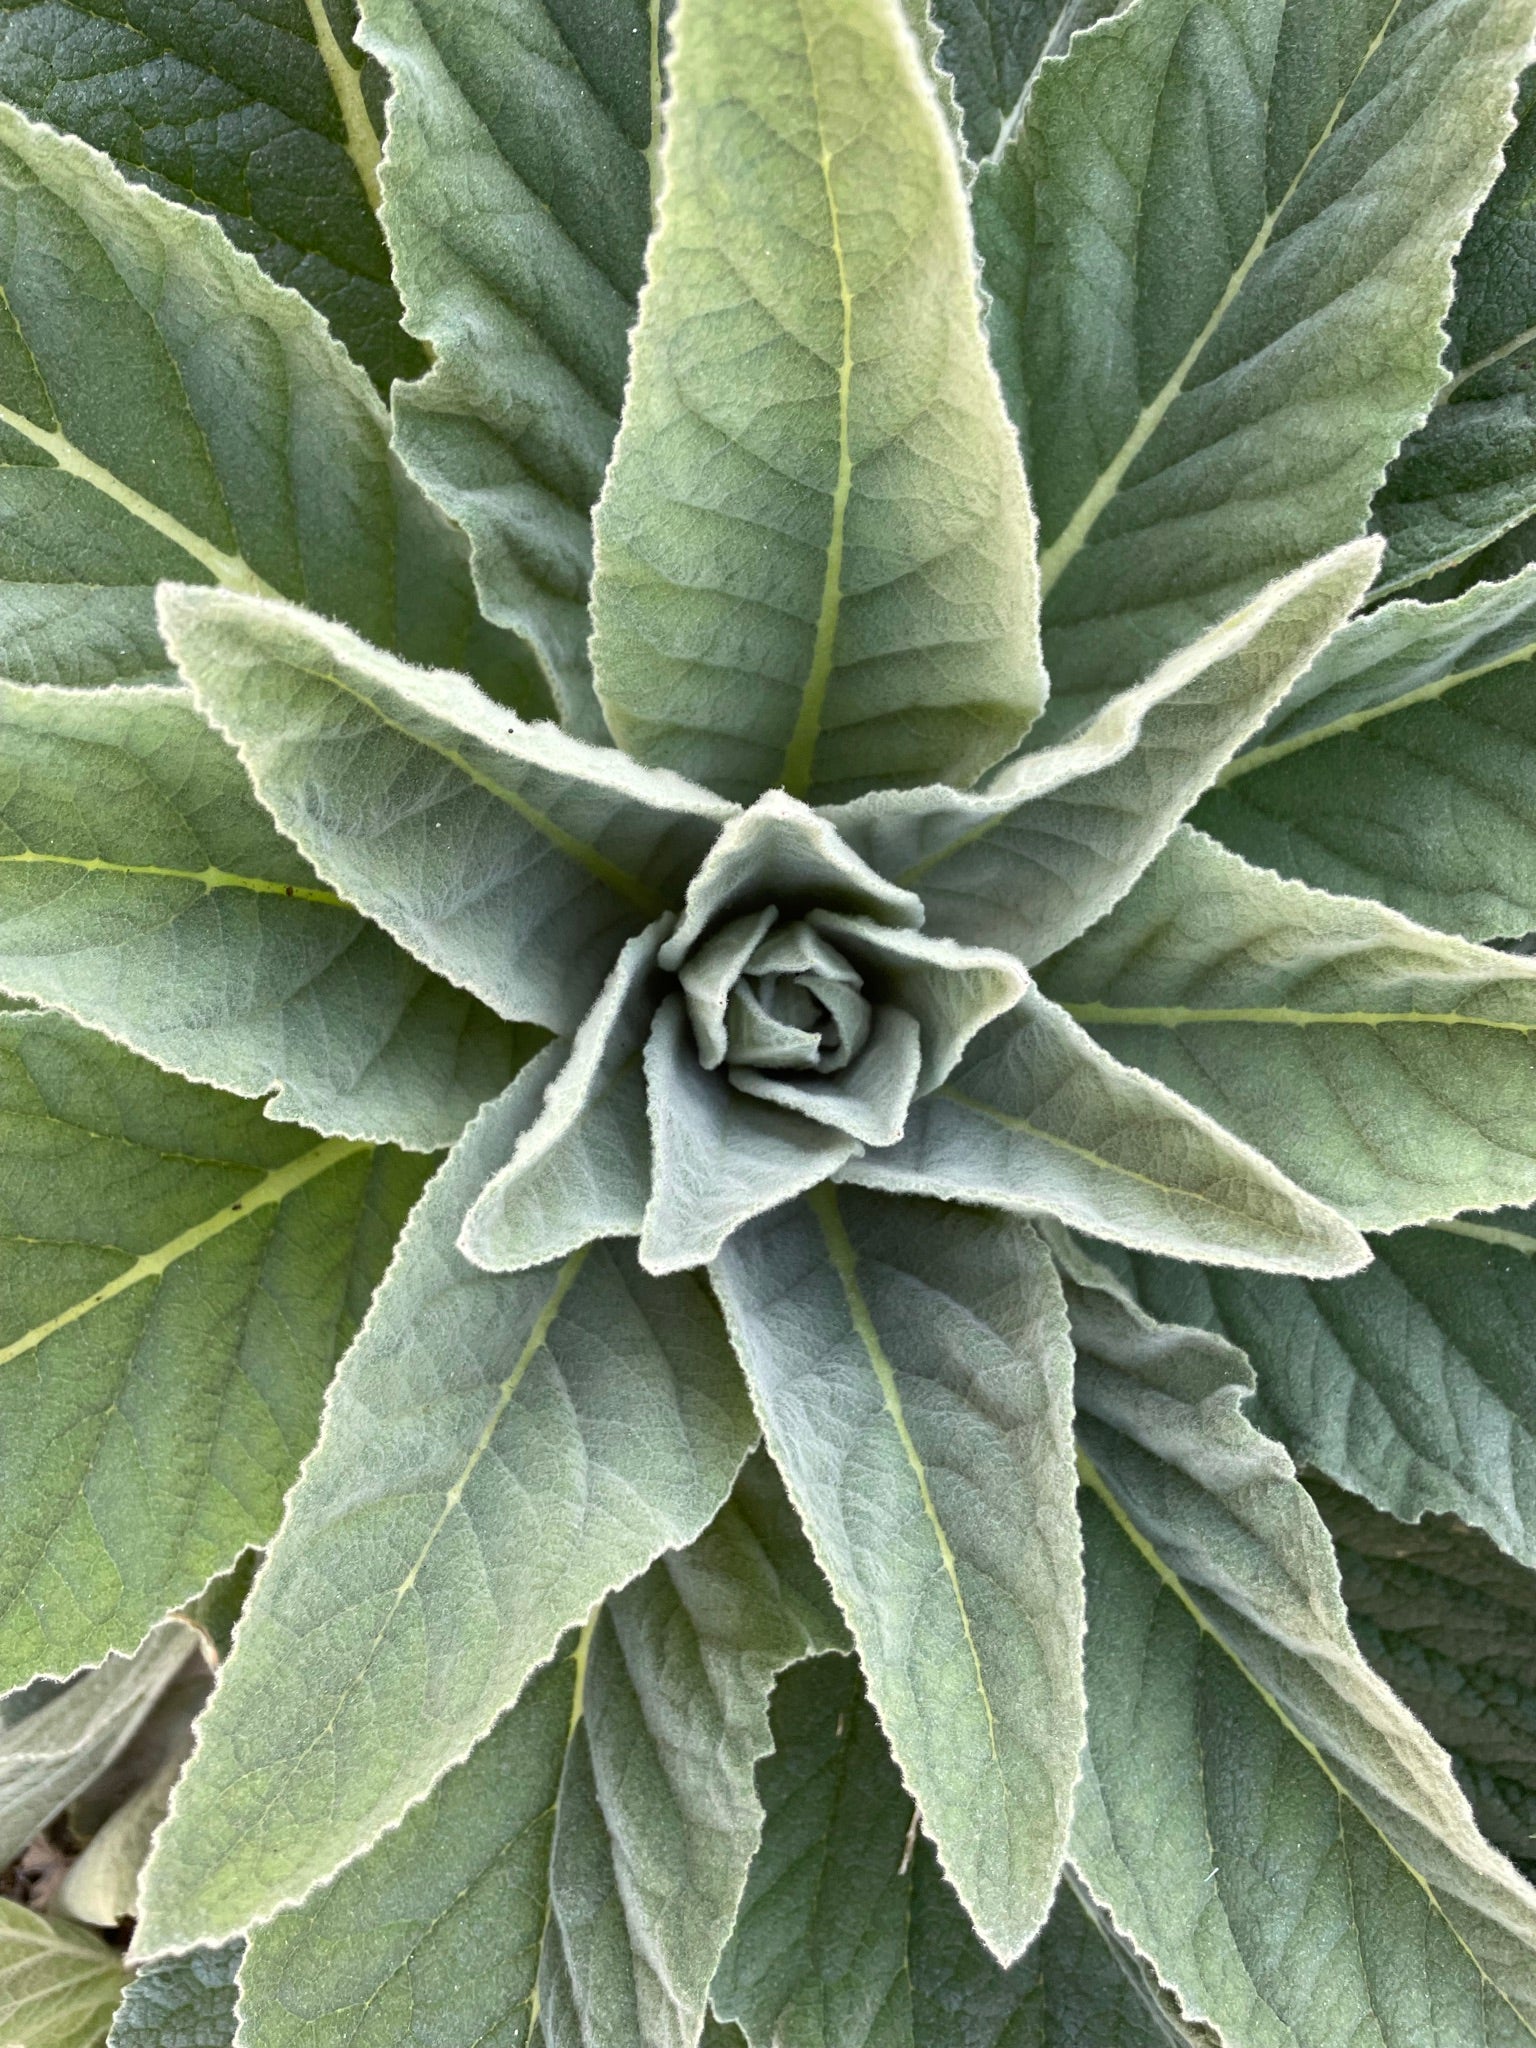 A mullein plant looking down on it from above